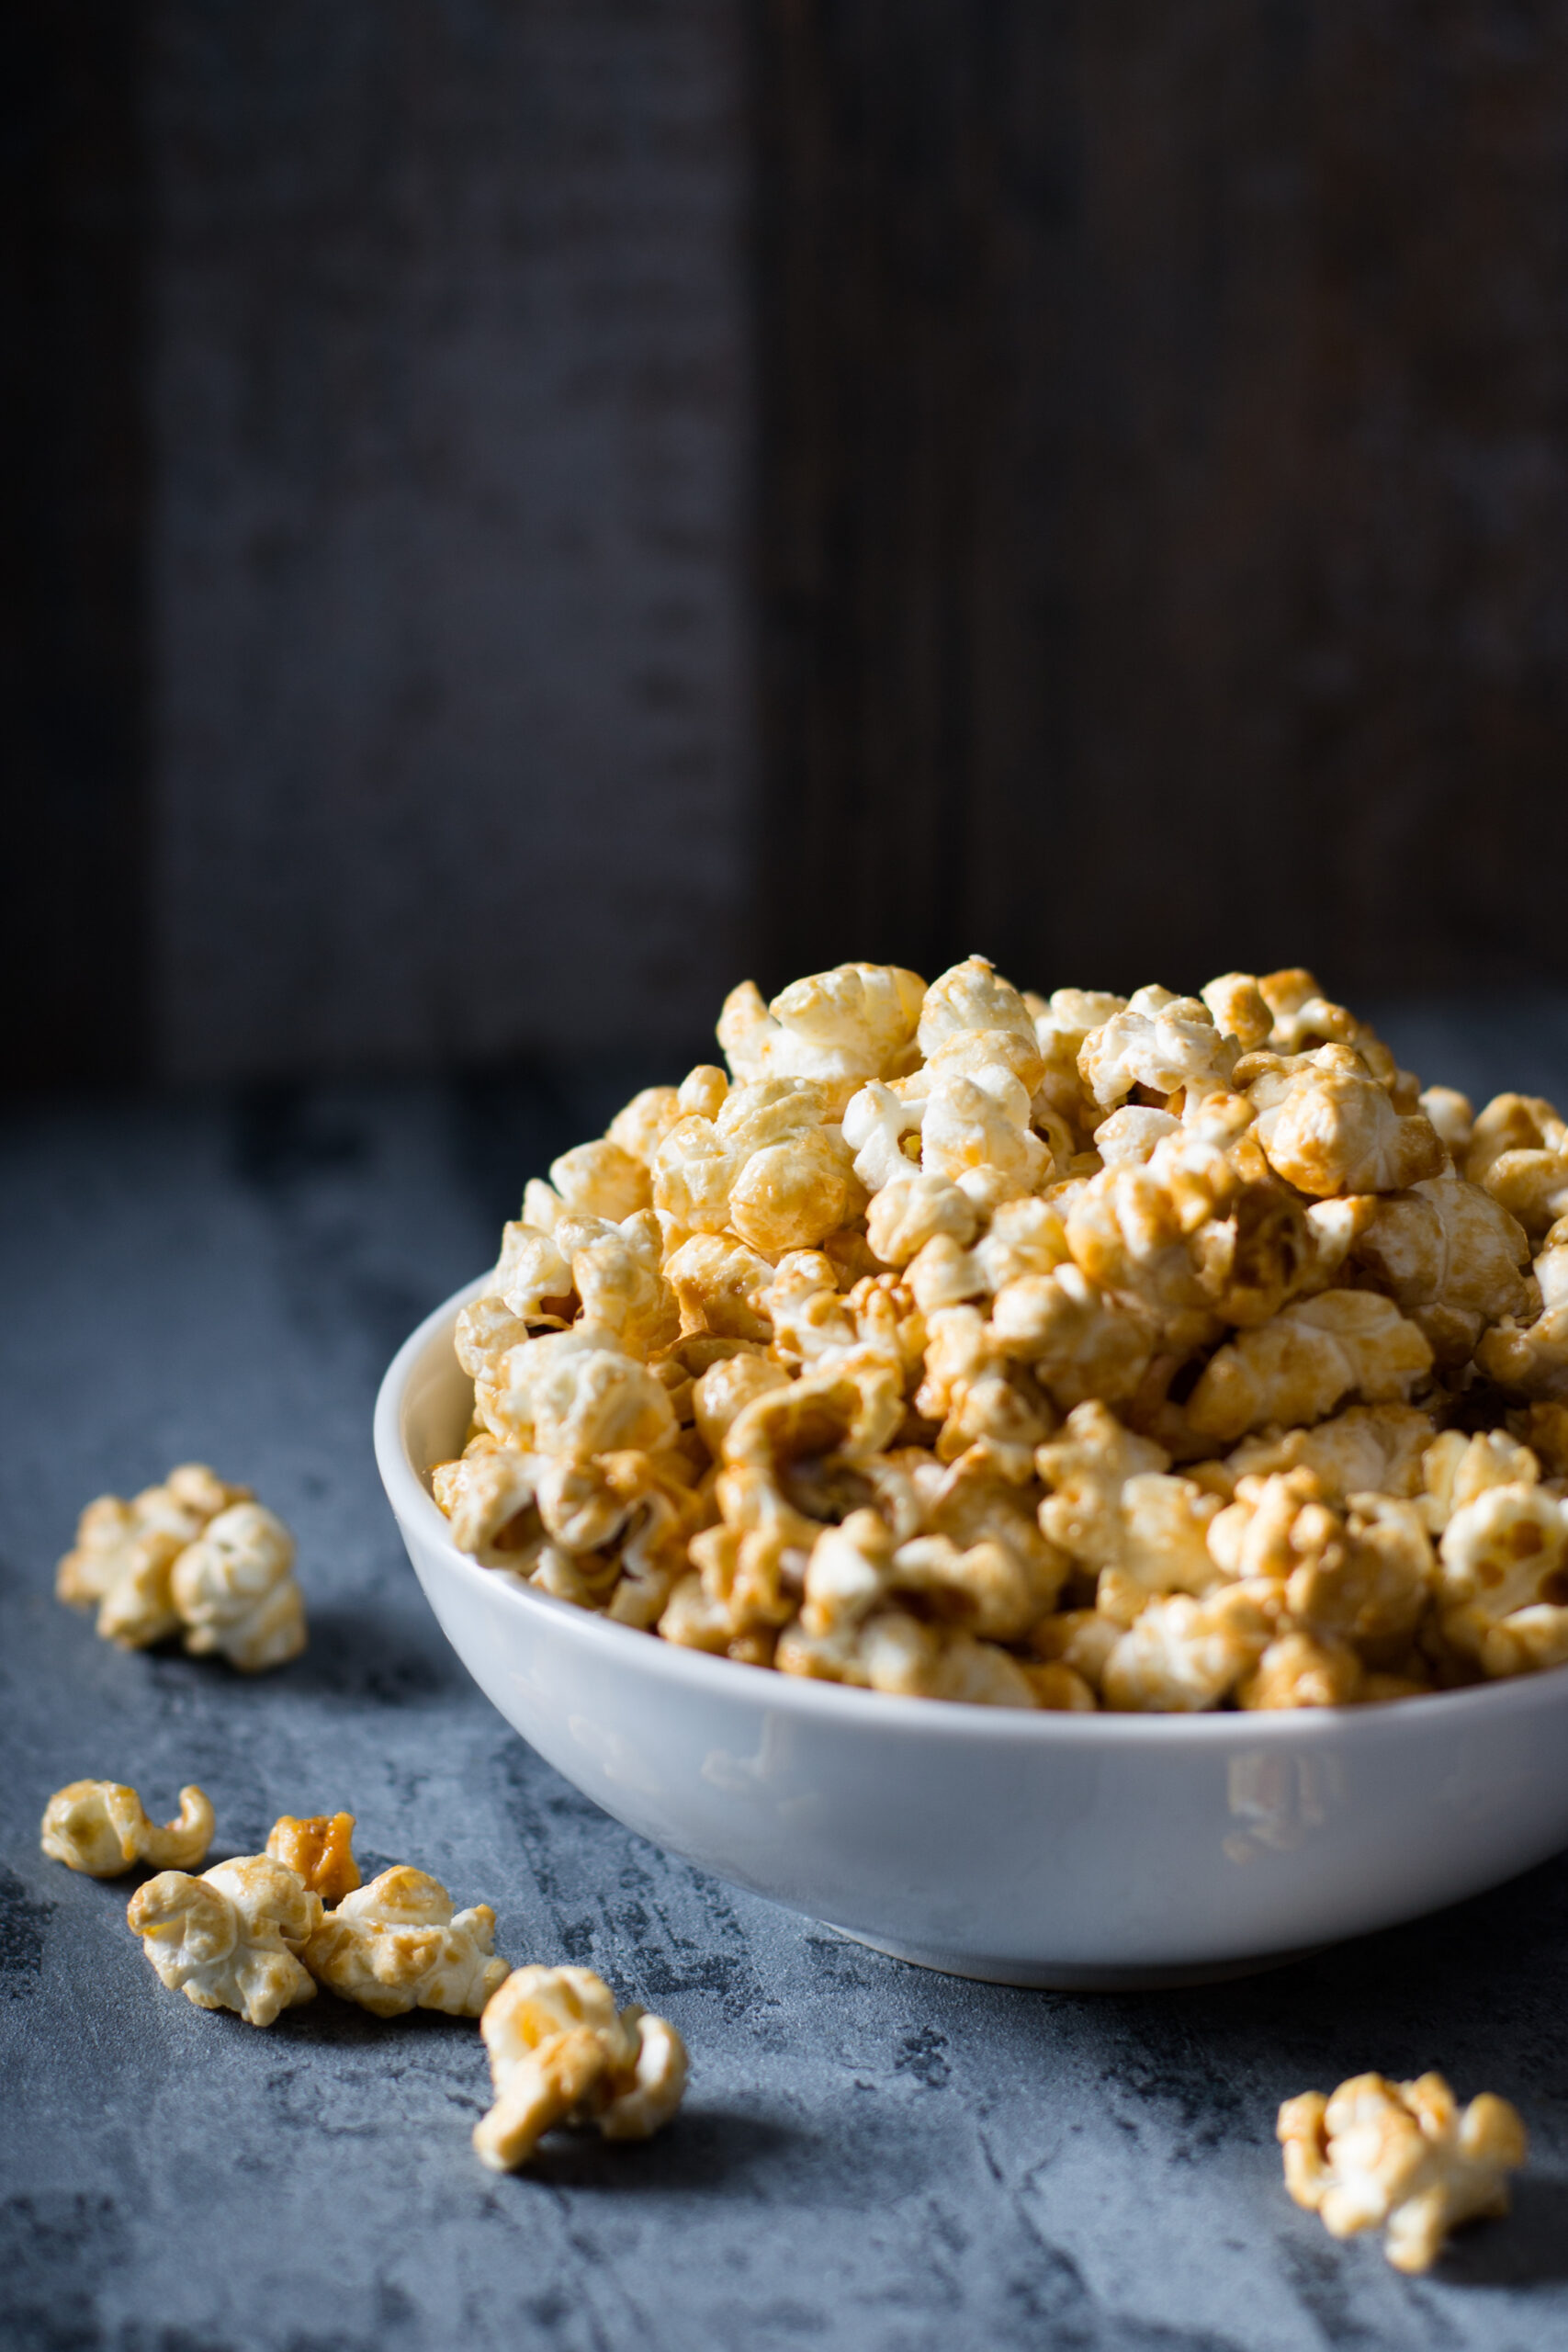 Homemade Golden Caramel Popcorn in a Bowl - Chewy Caramel Coated Popcorn Recipe; a chewy gooey version of caramel popcorn! Packed into pretty decorative bags, makes a great gift for family and coworkers!